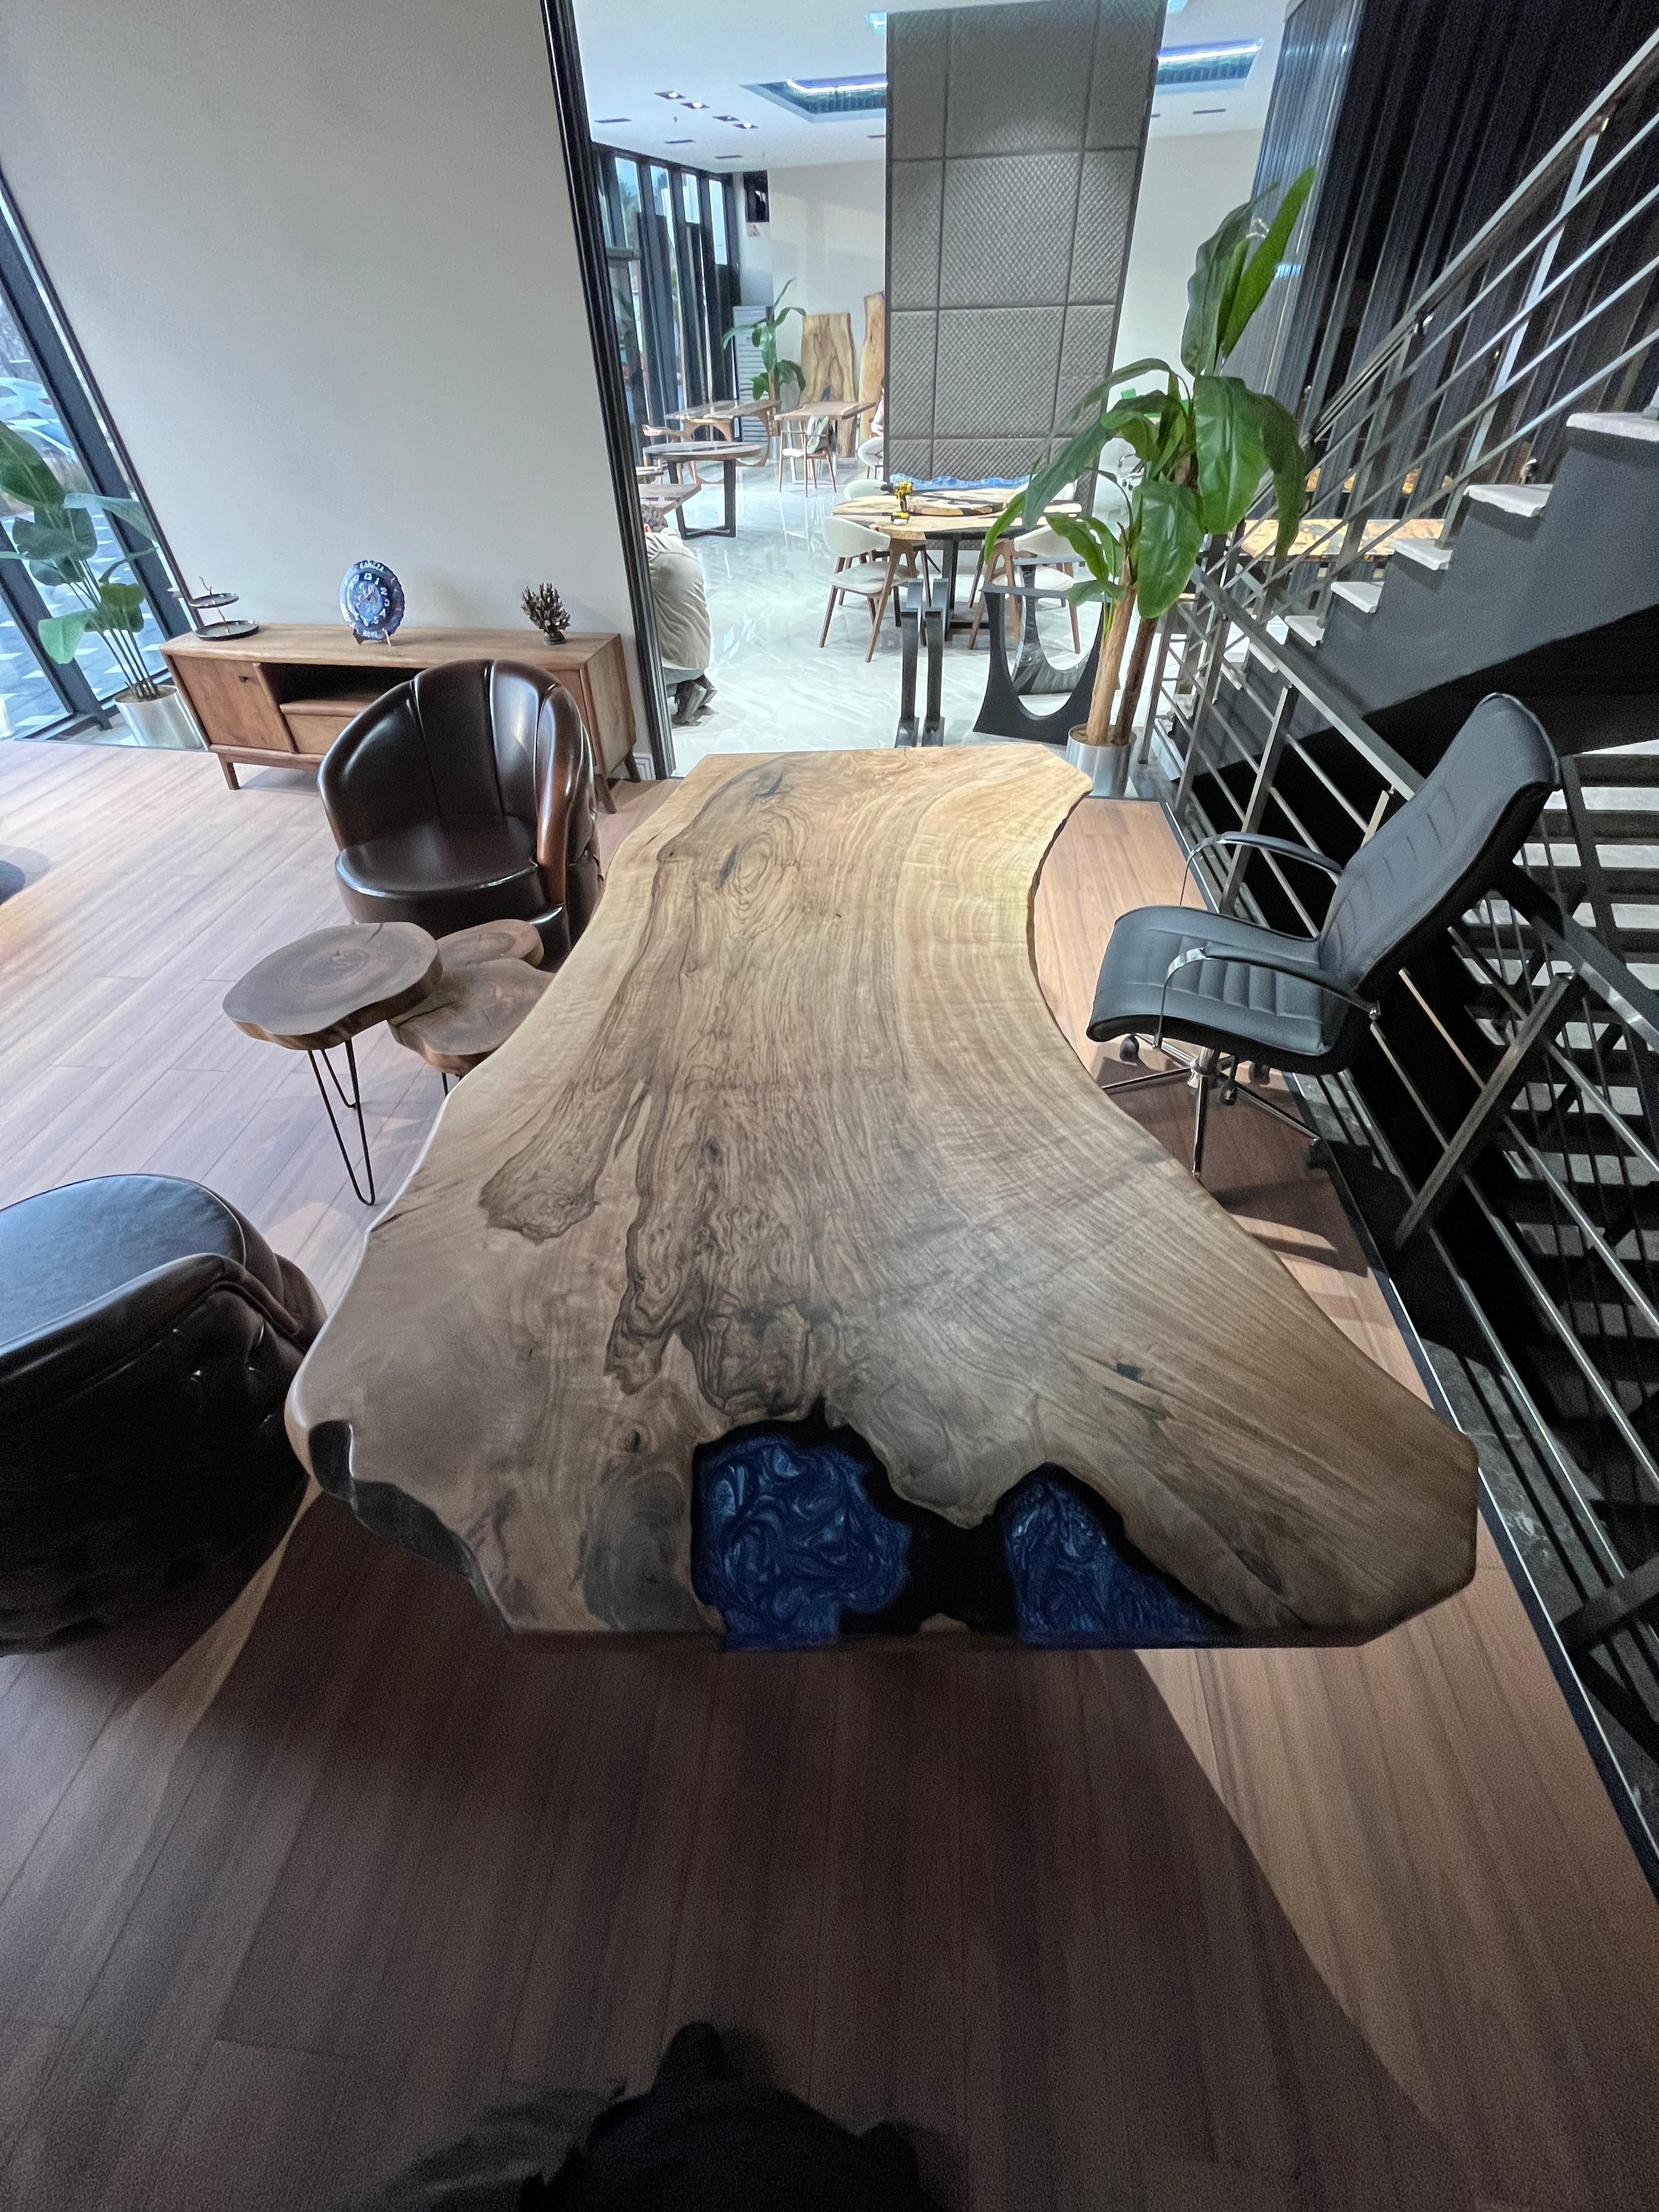 Solid Walnut Wood Conference Table

This table is made of 500 years old Walnut Wood. The grains and texture of the wood describe what a natural walnut woods looks like.
It can be used as a dining table or as a conference table. Suitable for indoor